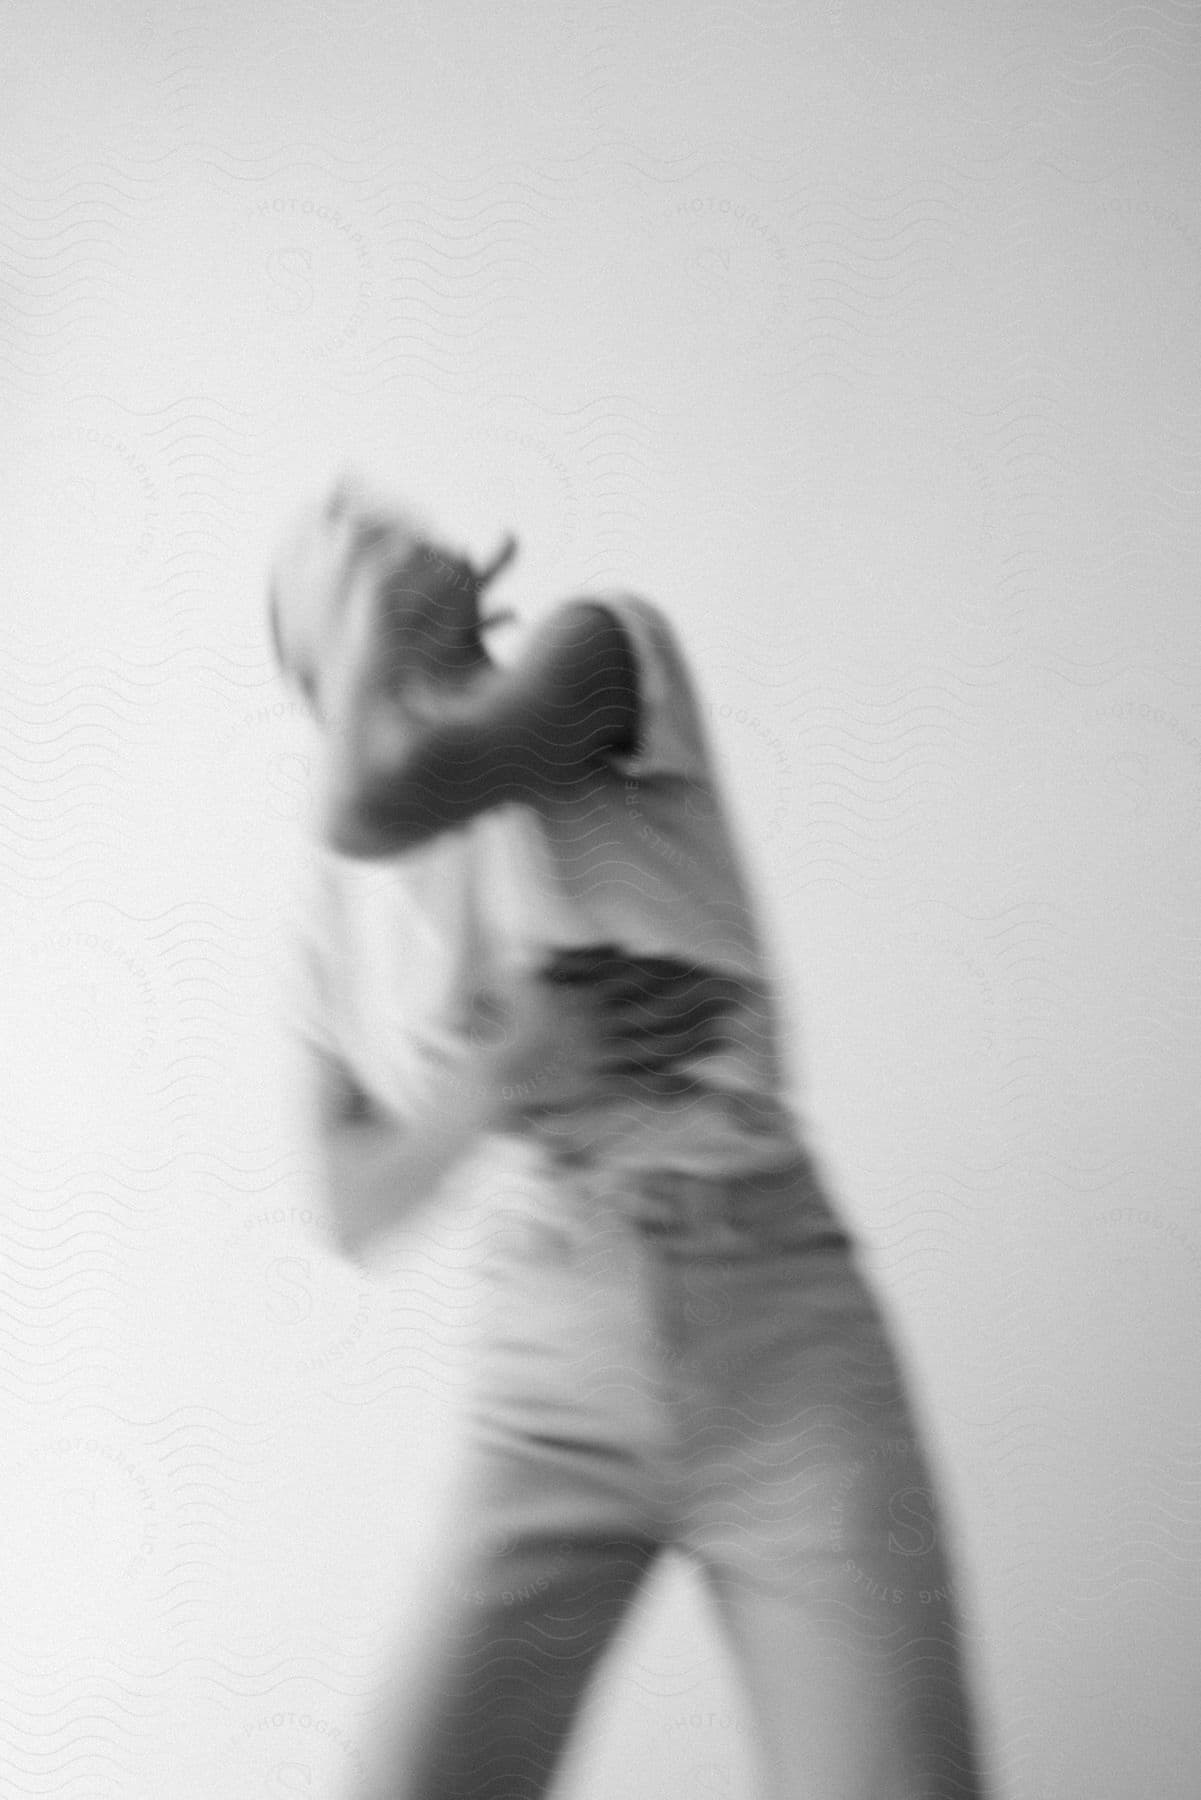 Stock photo of a person performing a gesture in a blurry photograph